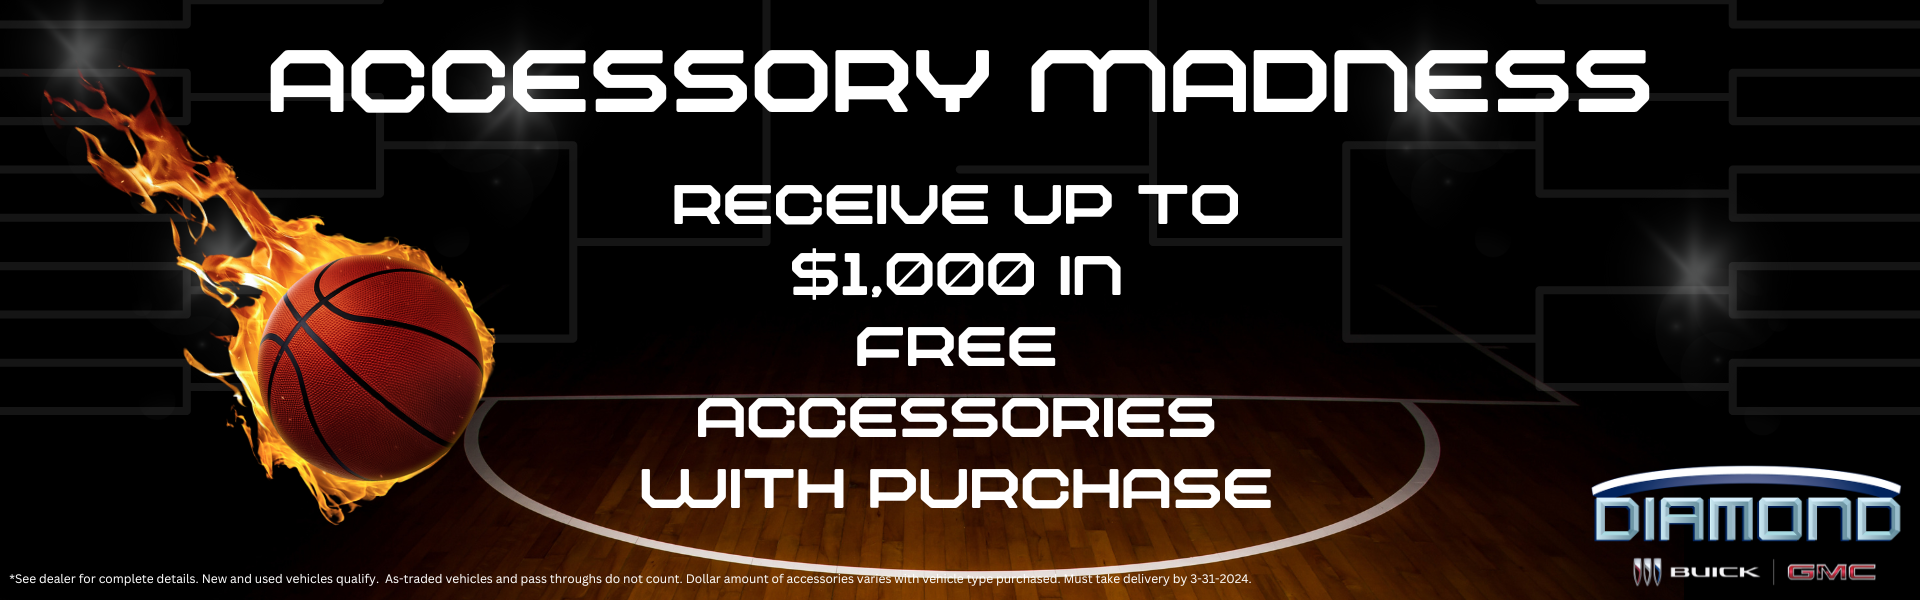 Up to $1000 in free accessorites with purchase